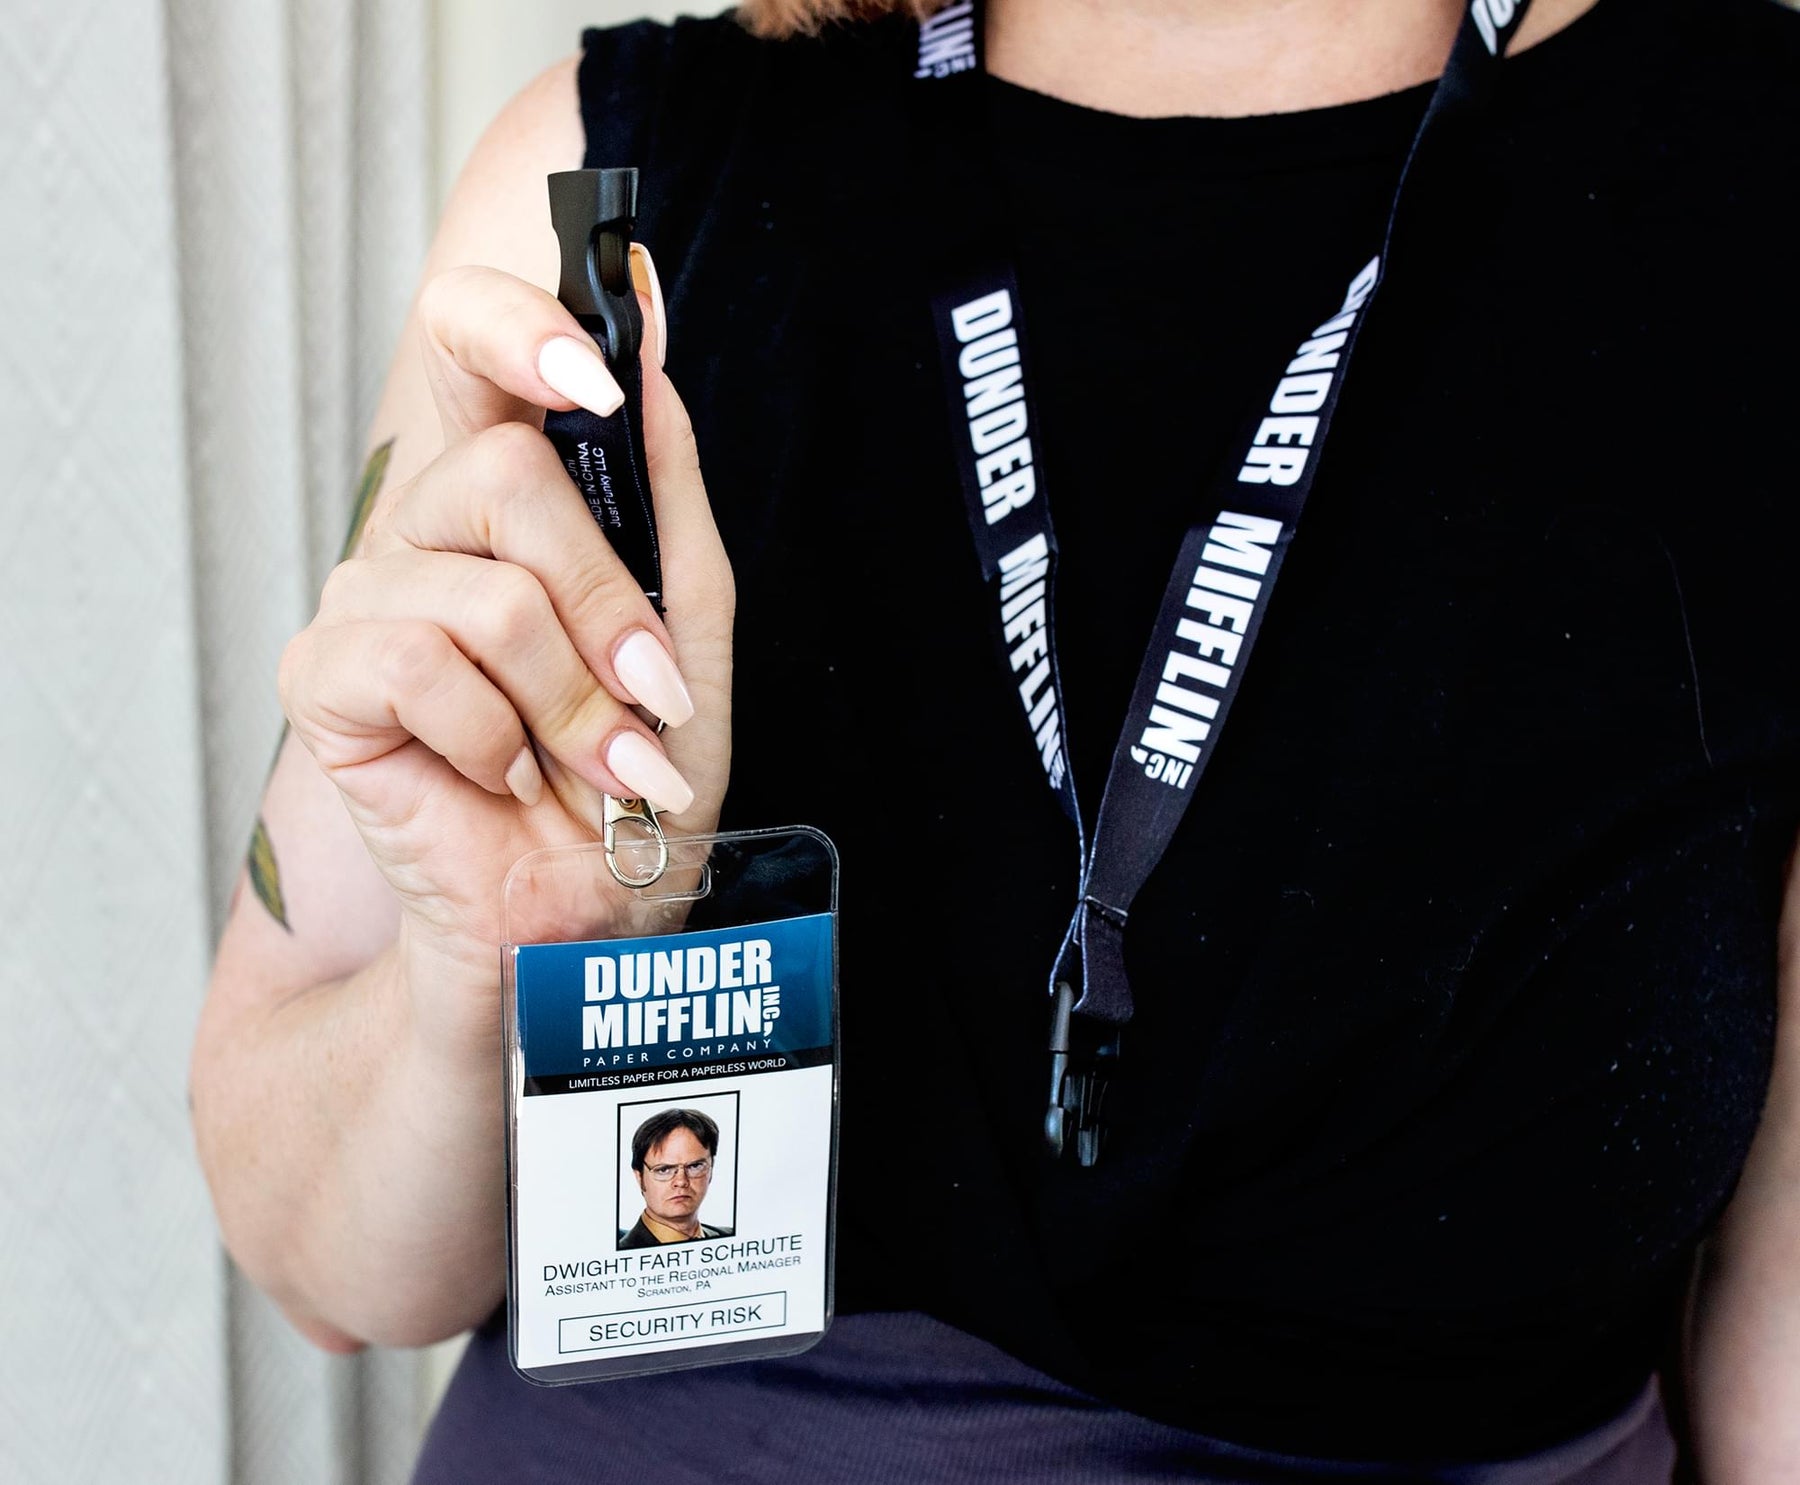 The Office Dunder Mifflin 22-Inch Lanyard With Dwight Schrute ID Card